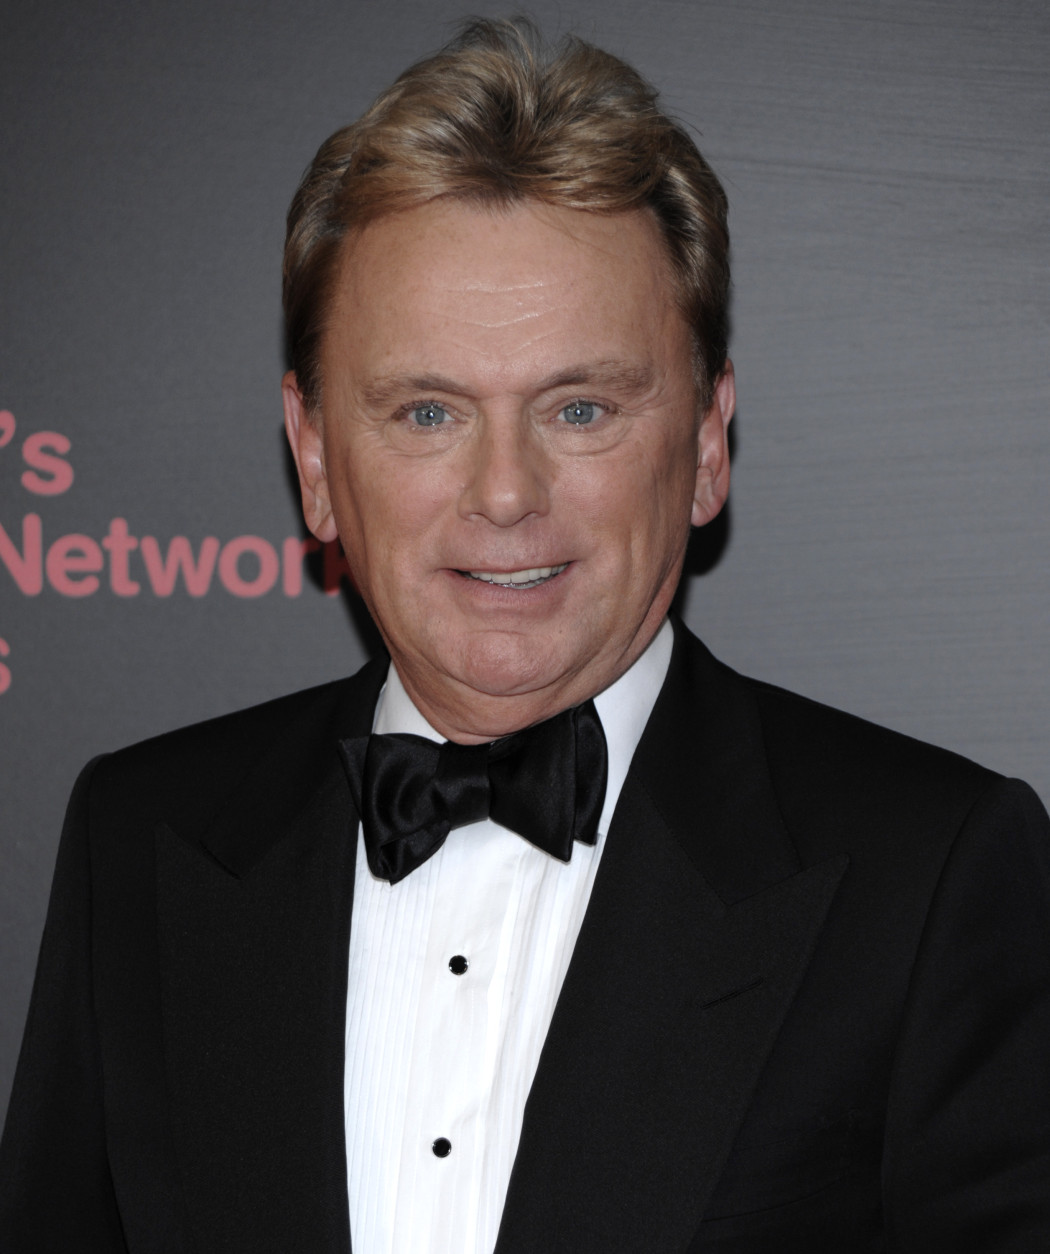 Television personality Pat Sajak arrives at the 38th Annual Daytime Emmy Awards in Las Vegas on Sunday, June 19th, 2011. (AP Photo/Dan Steinberg)